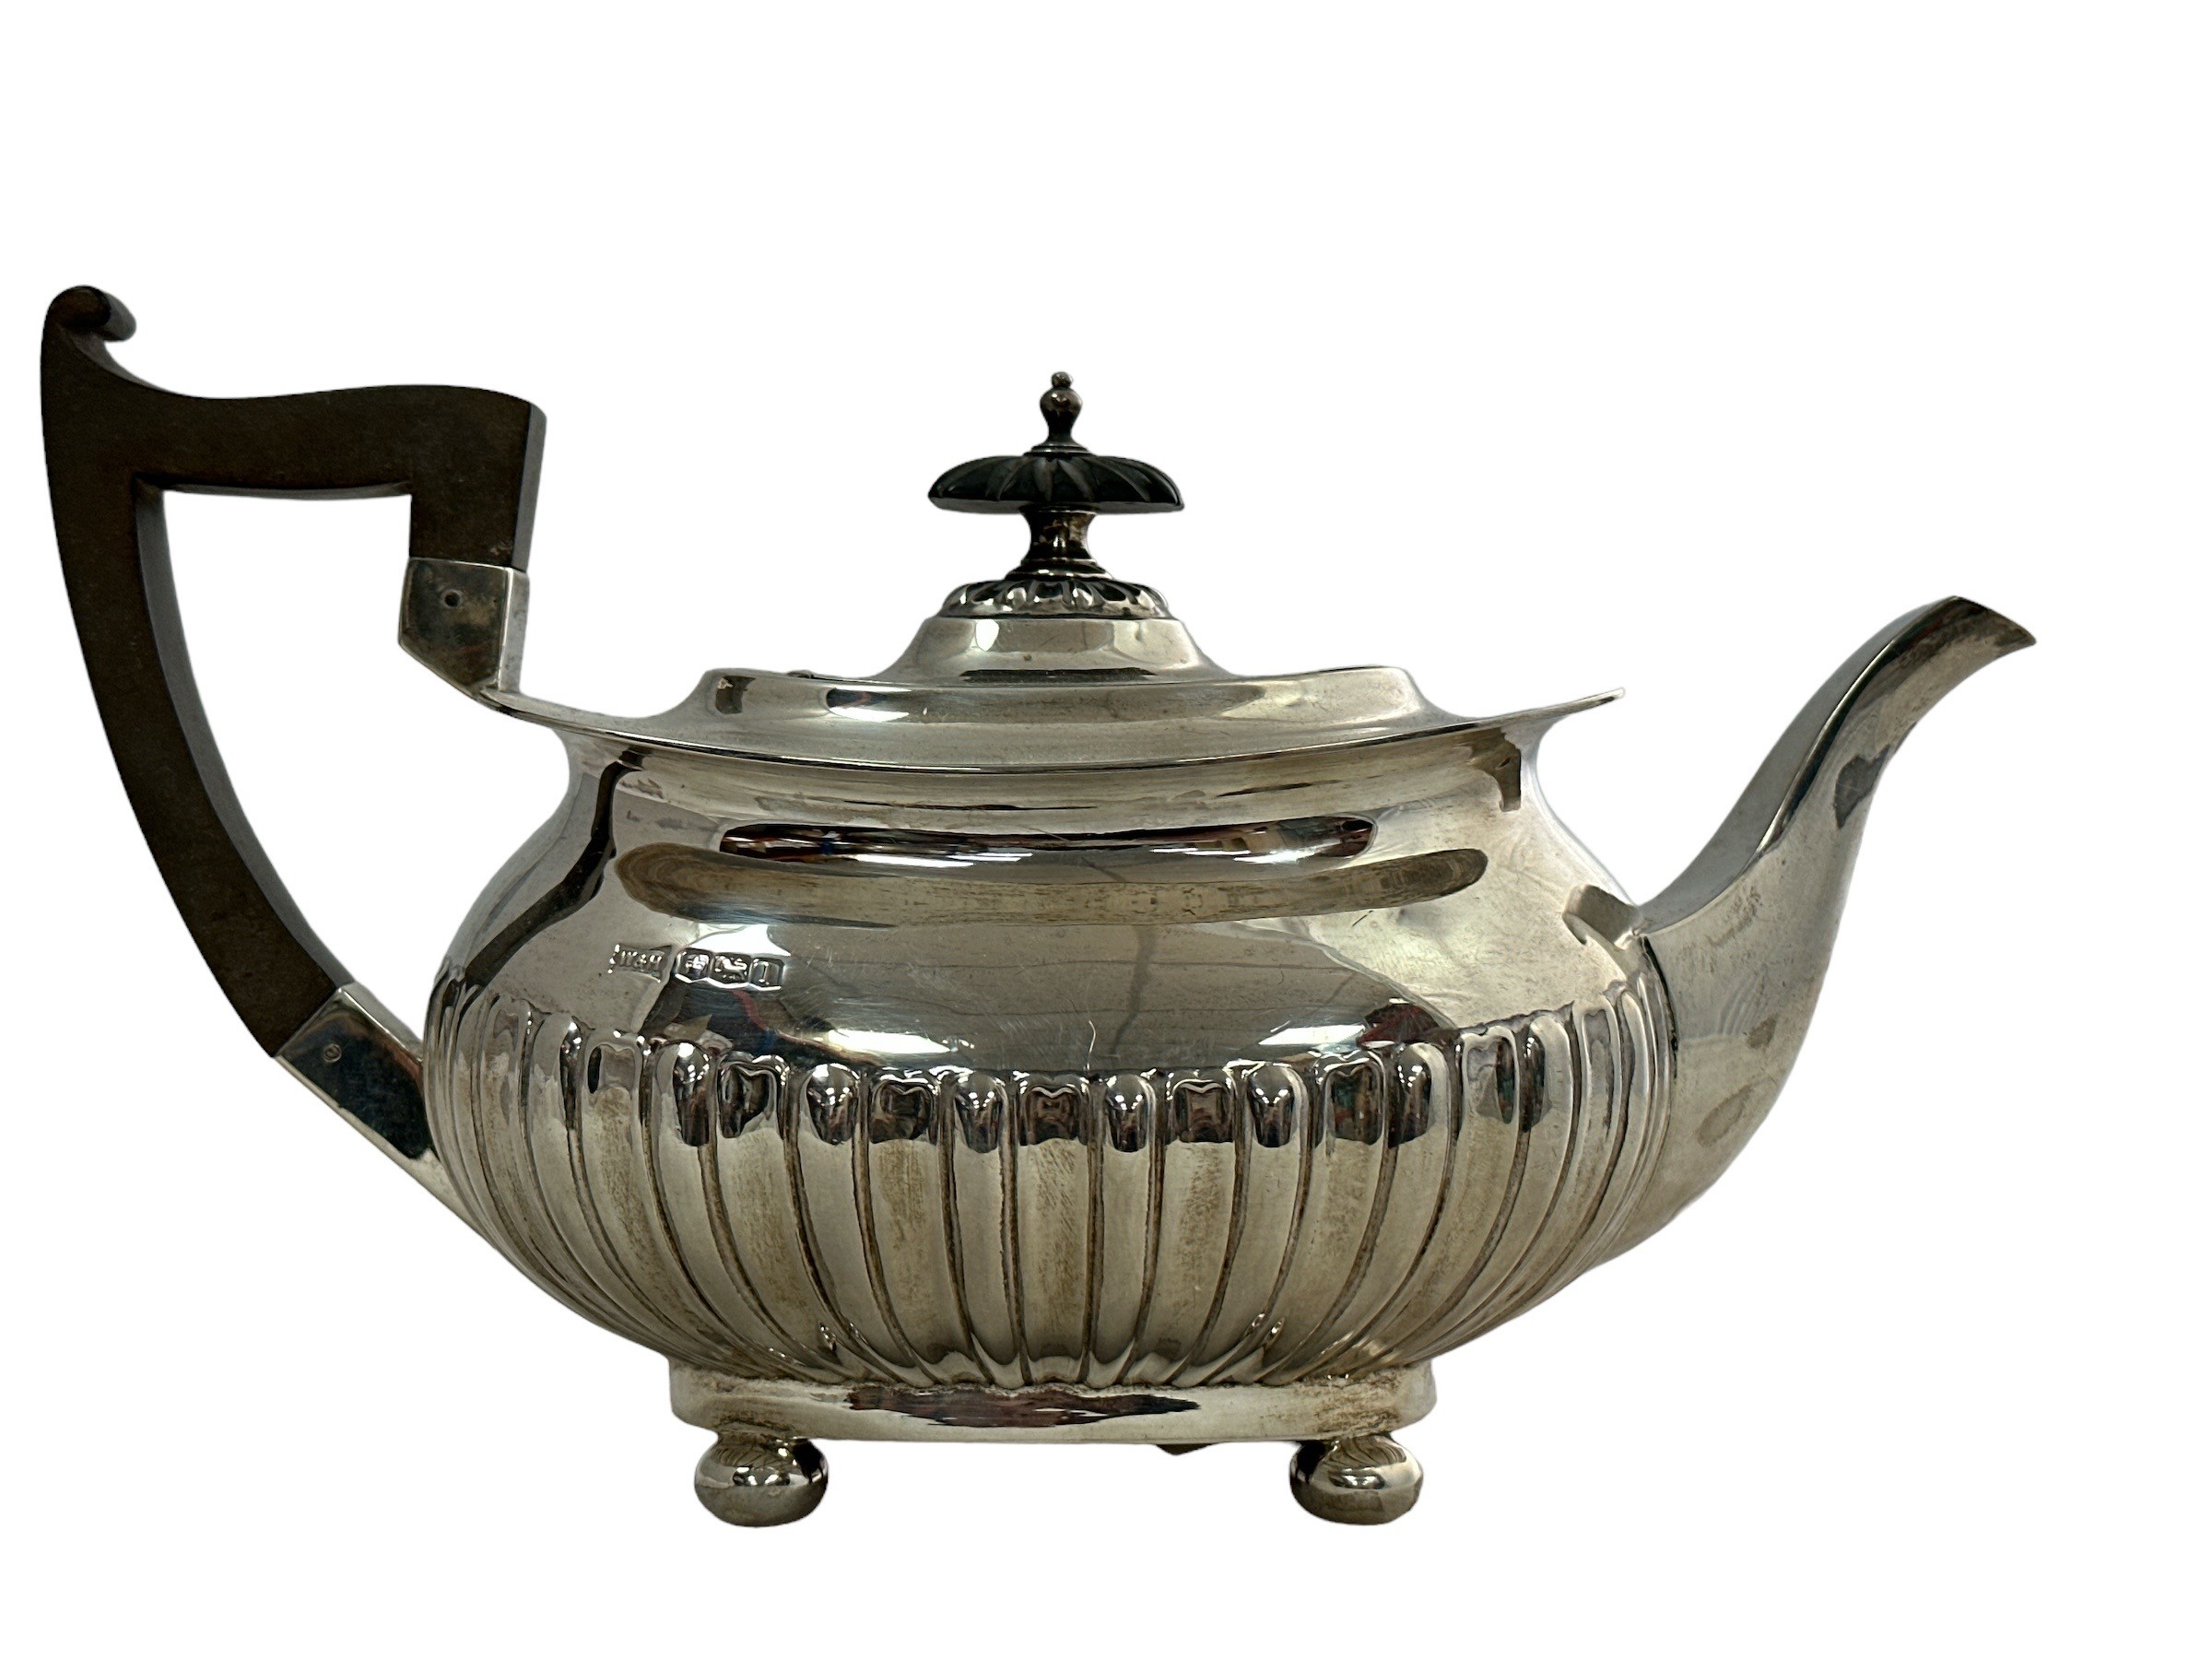 A silver teapot by Walker & Hall with a rectangular body with half fluted design, four ball feet, - Image 2 of 2